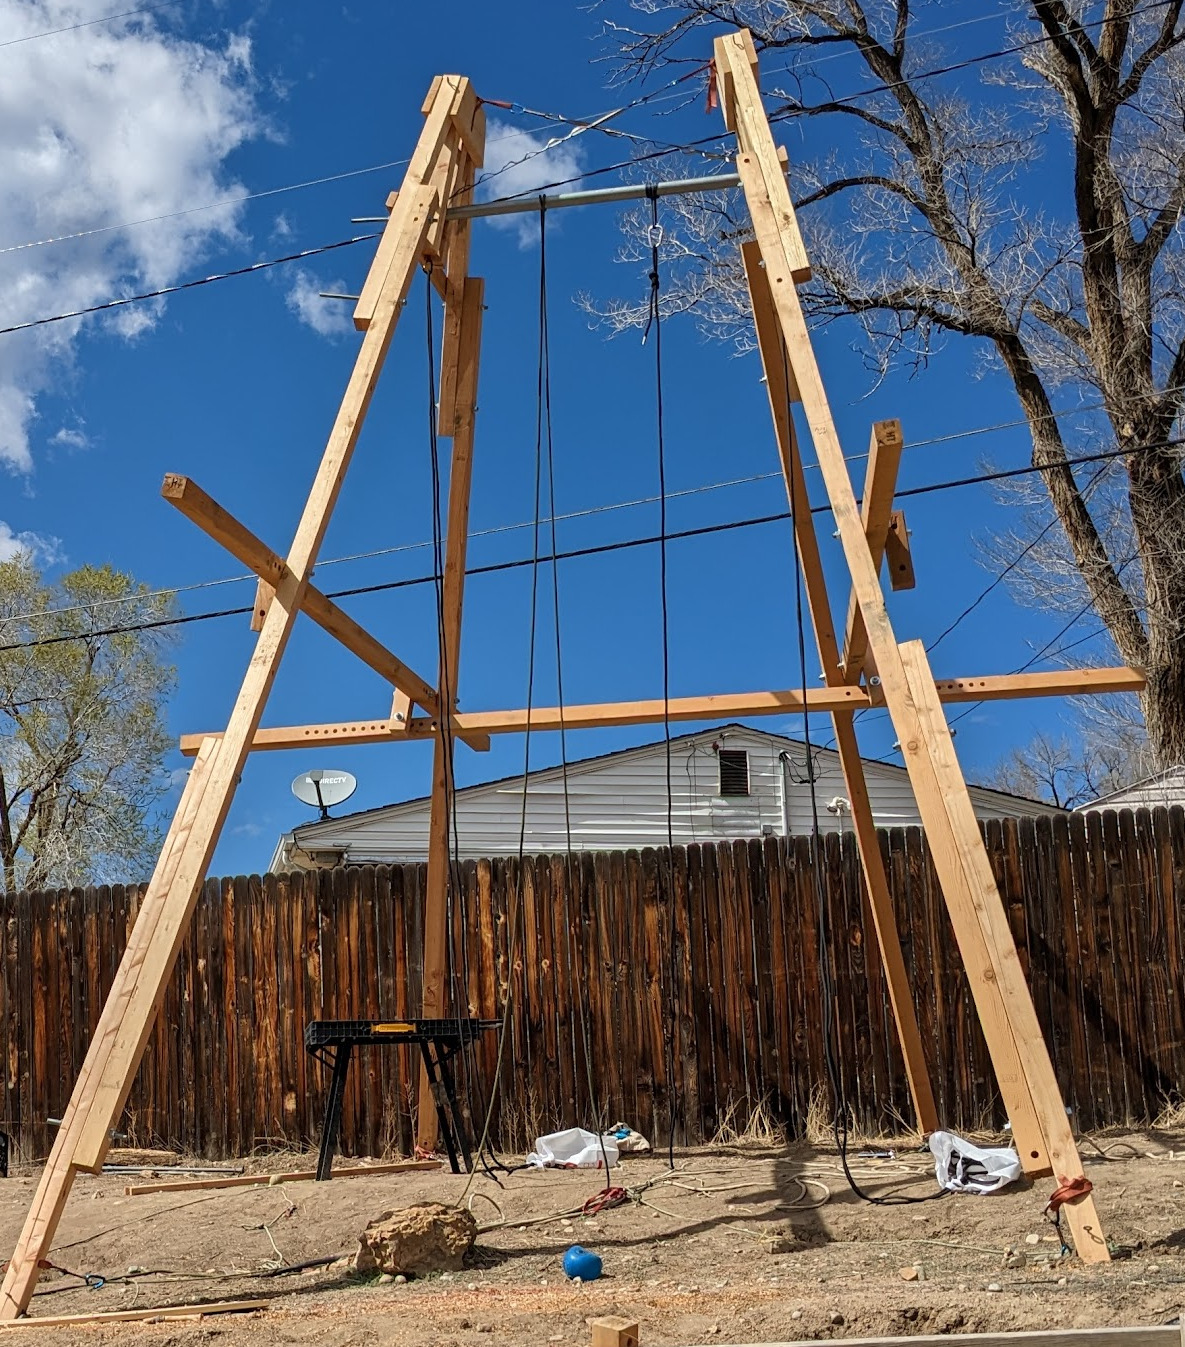 Two A's, mostly vertical, tops stabilized by straps, with a horizontal bar connecting them.  Three of four crossbeams attached at roughly eight feet above the ground.